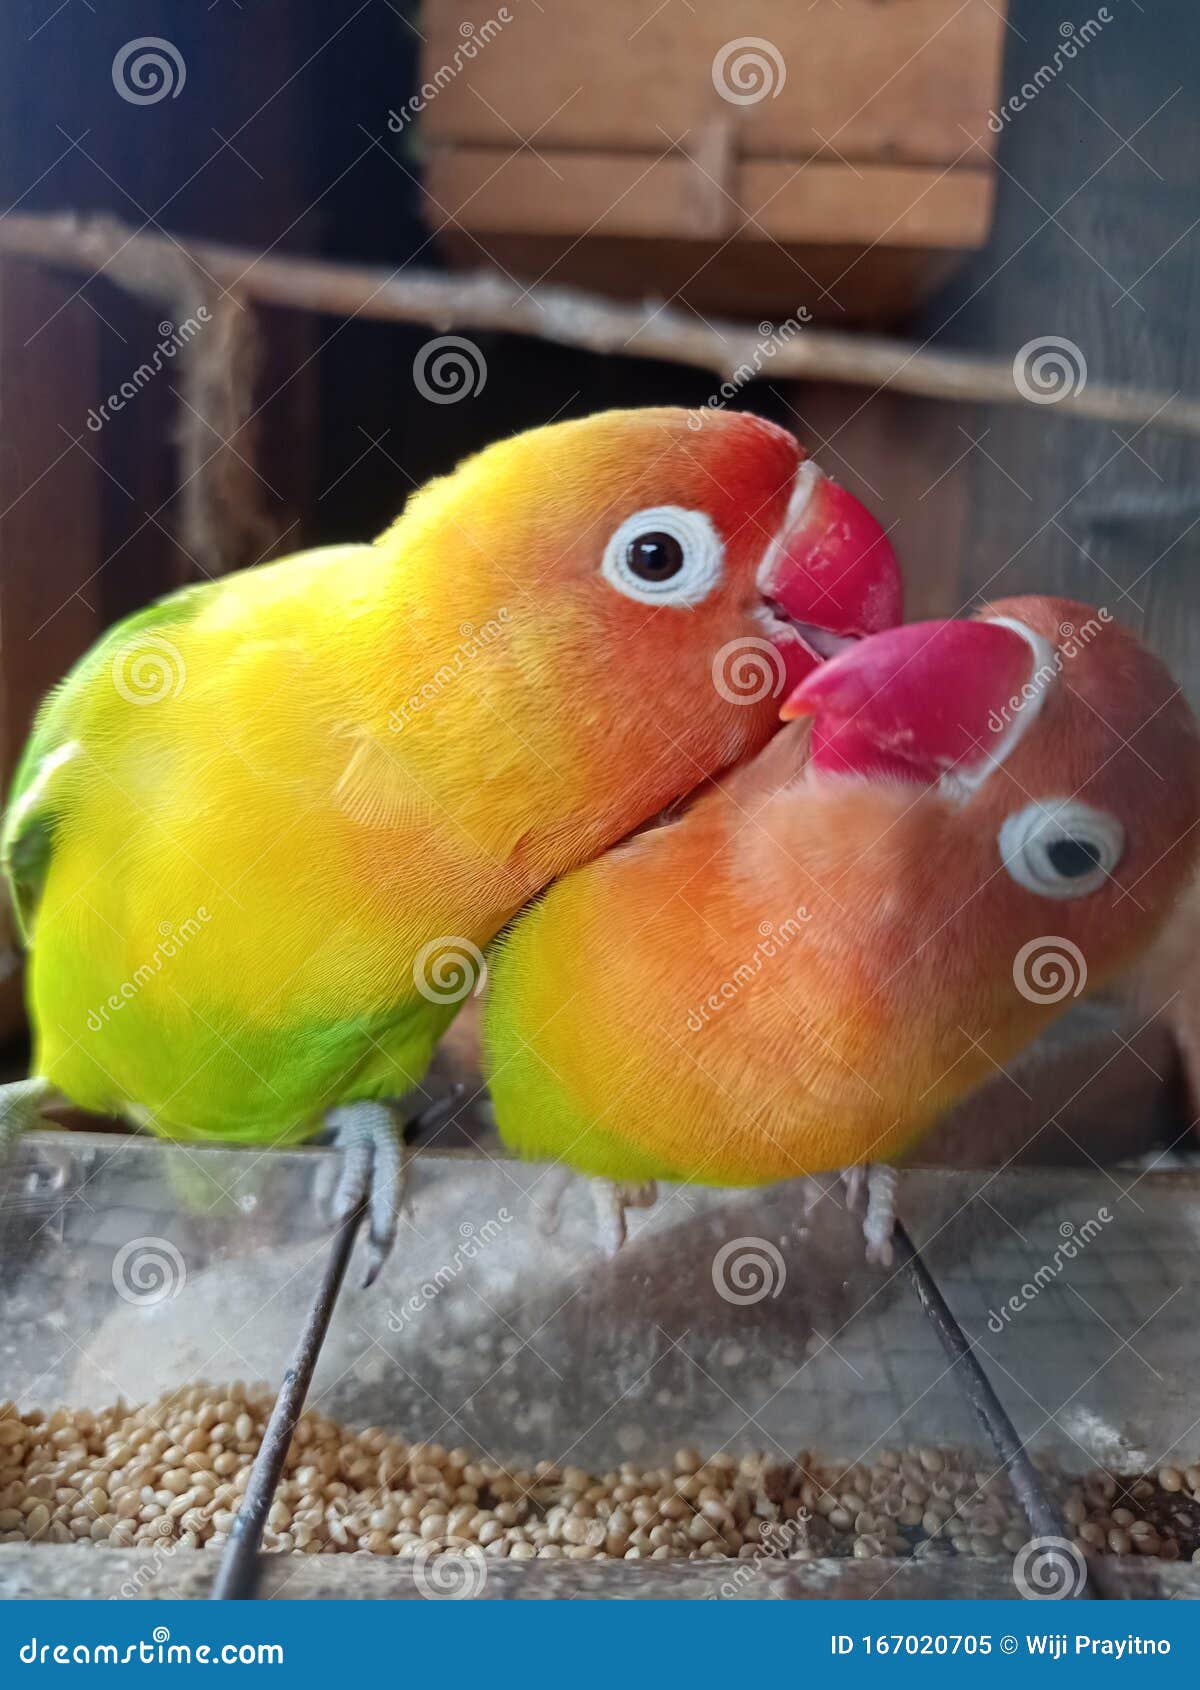 love birds that are kissing